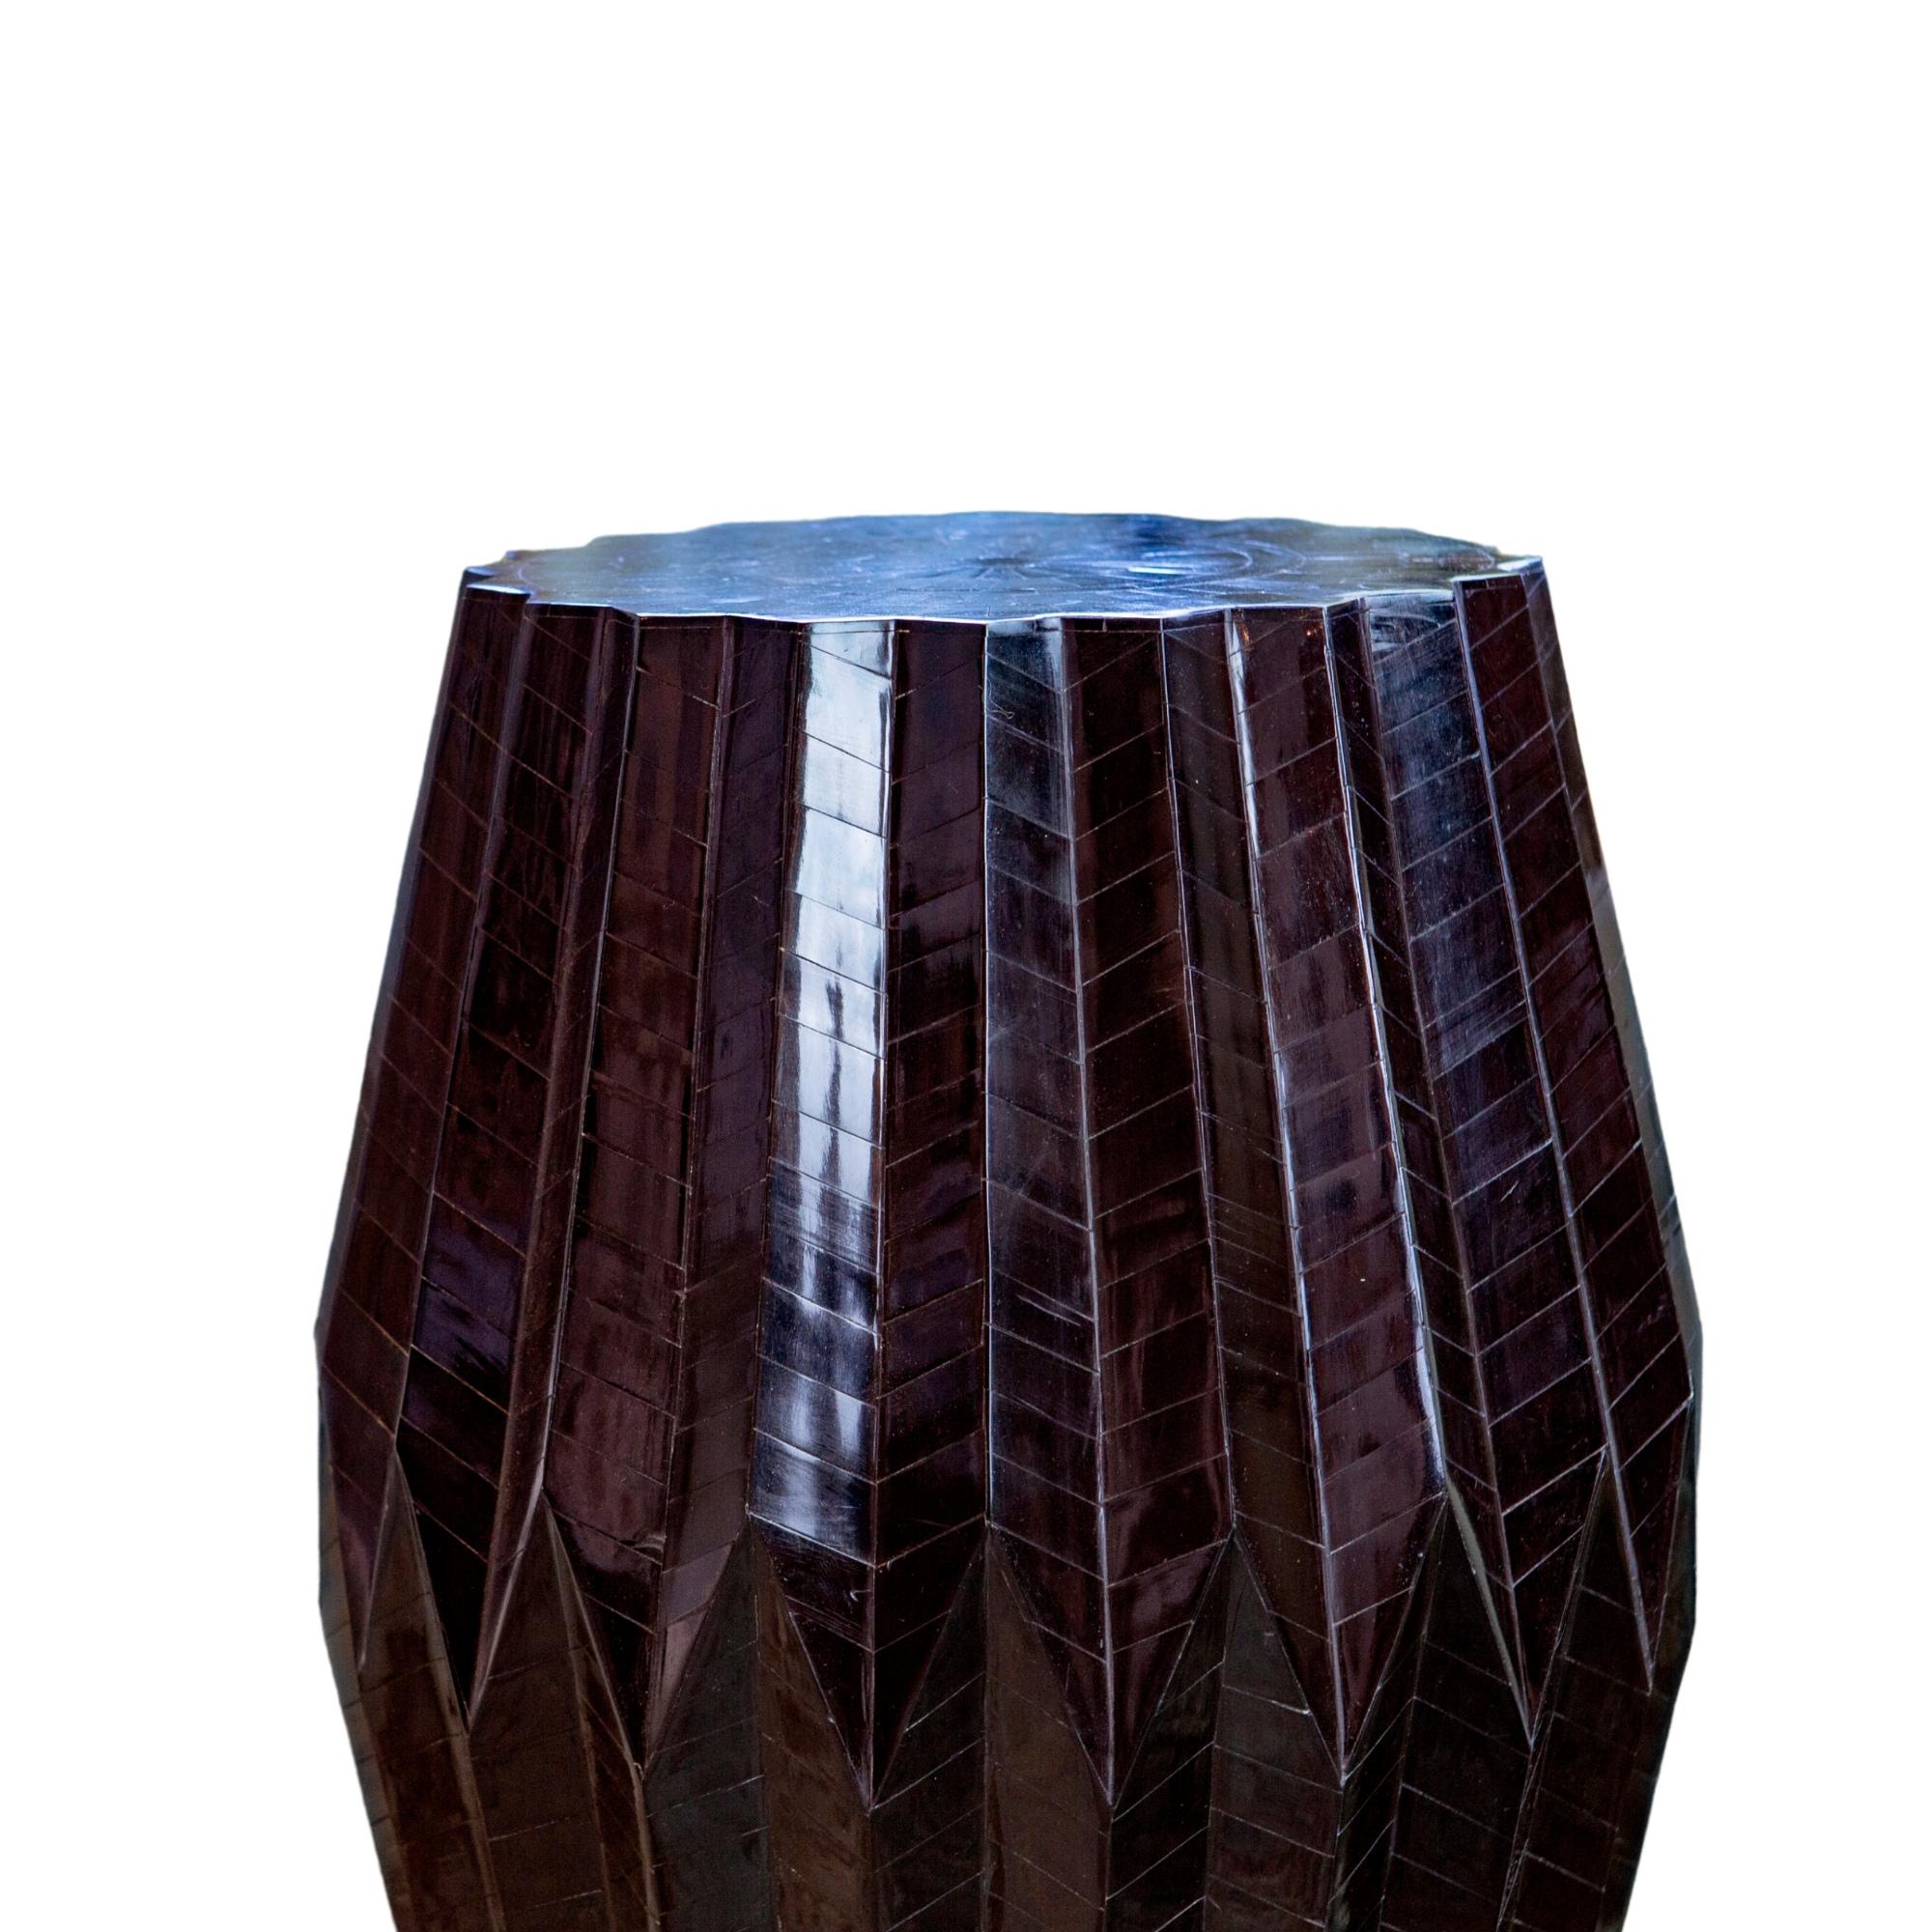 Resembling its namesake, the Tabla which is an Indian percussion drum, this end table flaunts a sculptural form. Thus Award winning table is made with a wood base and topped with angular bone chips to create a tonal pattern on a rhythmic form. The